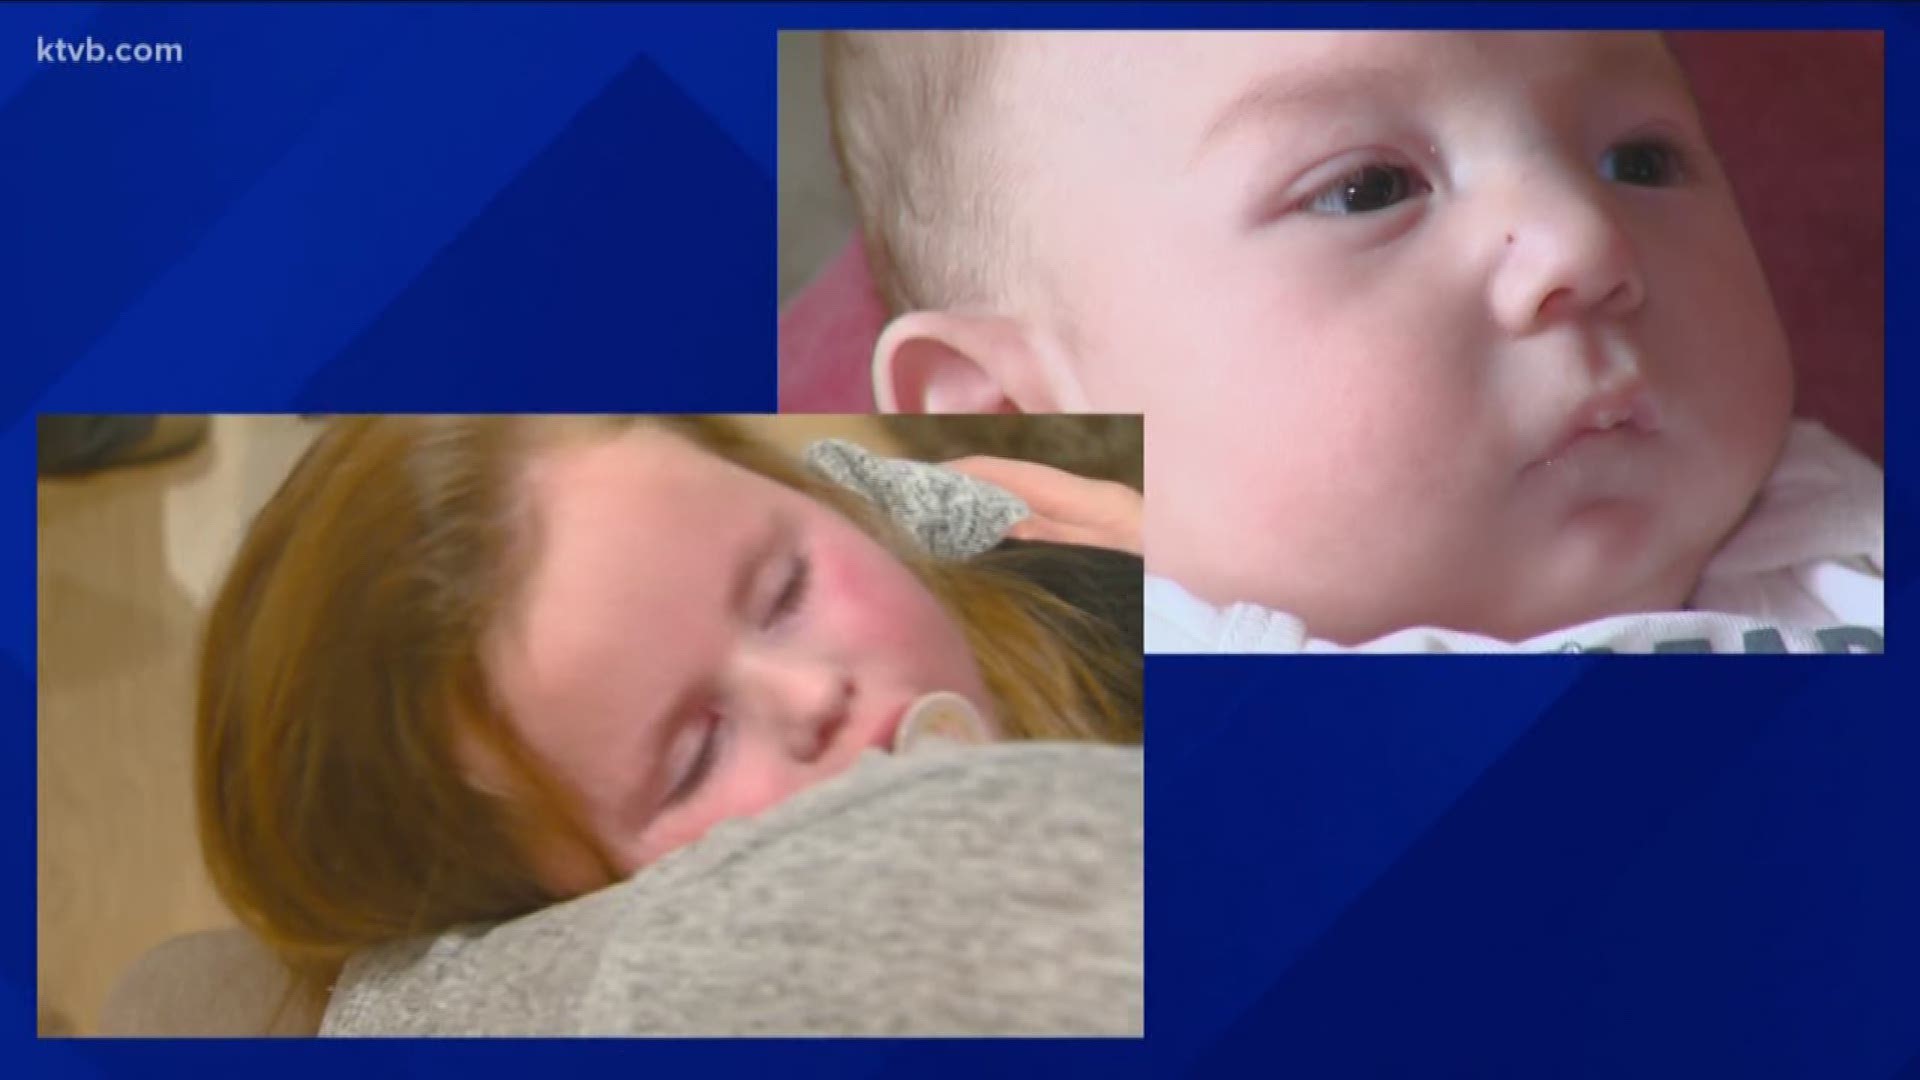 One Boise family was unable to get treatment because of the outbreak, while another family in Caldwell is now concerned their child was exposed to the mold.